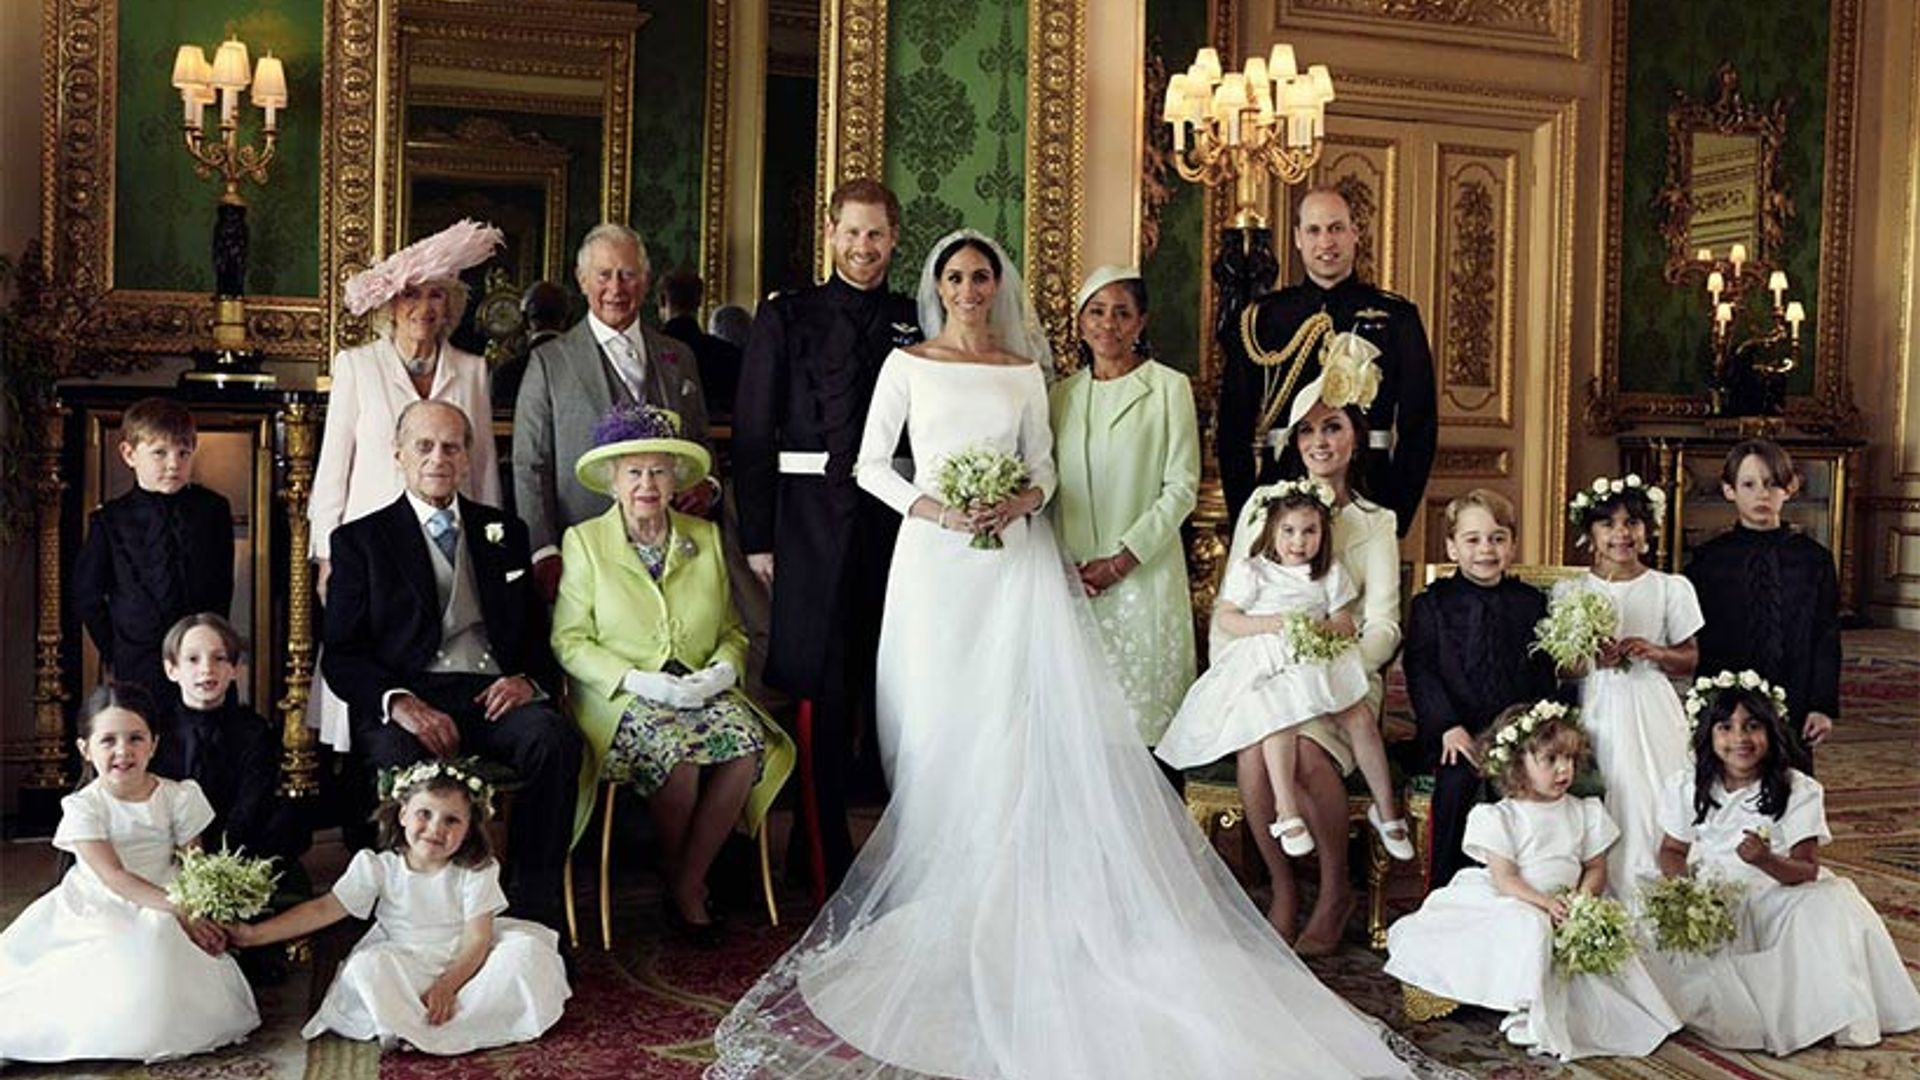 The official wedding photographs of Prince Harry and Meghan Markle have been released - and they are magical